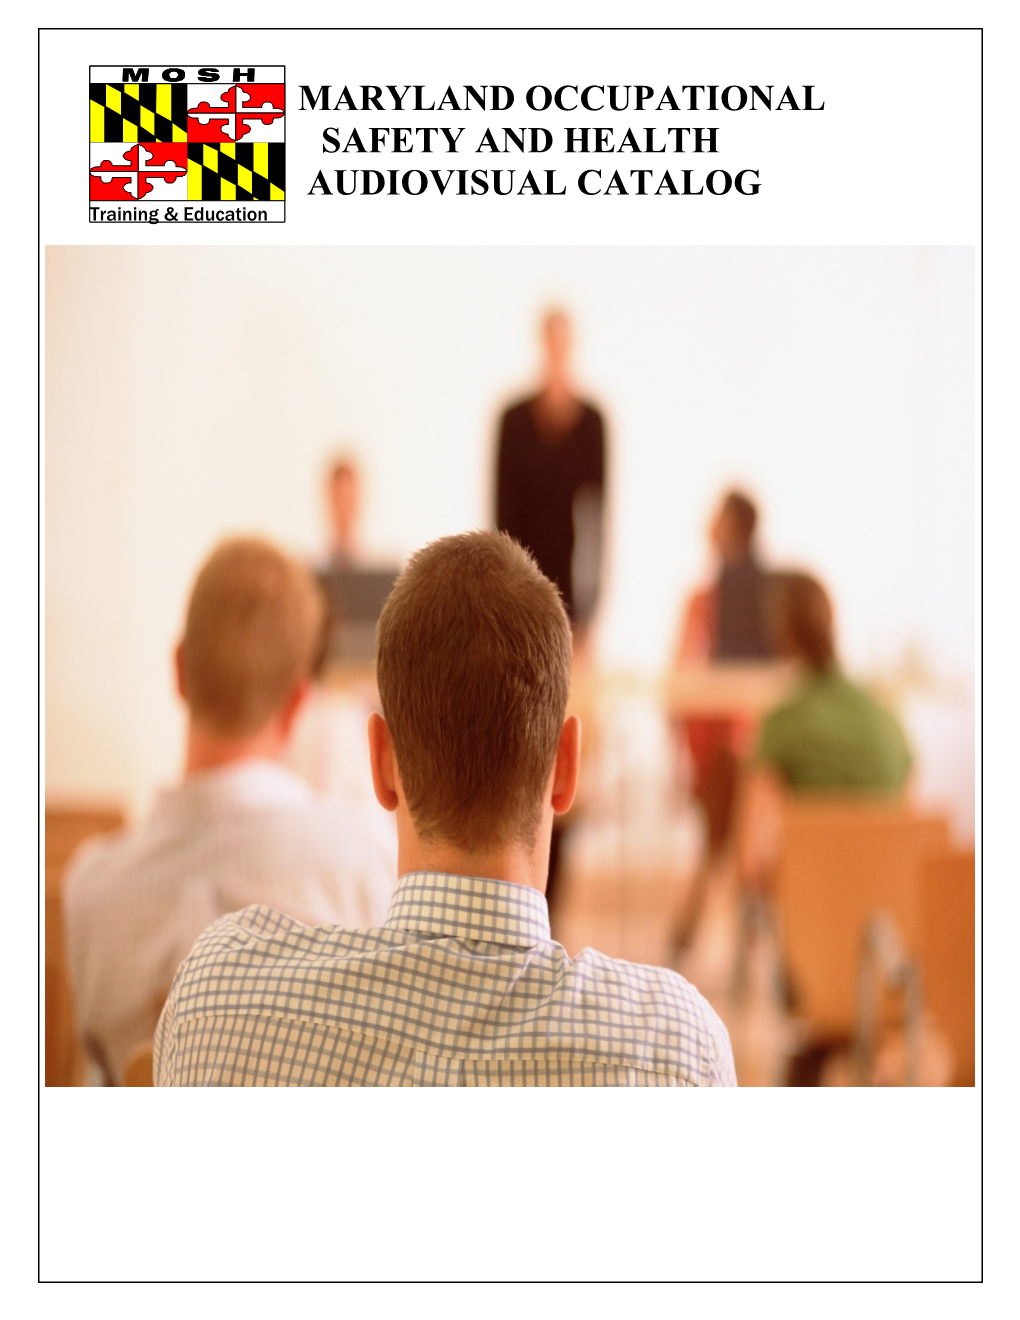 Maryland Occupational Safety and Health